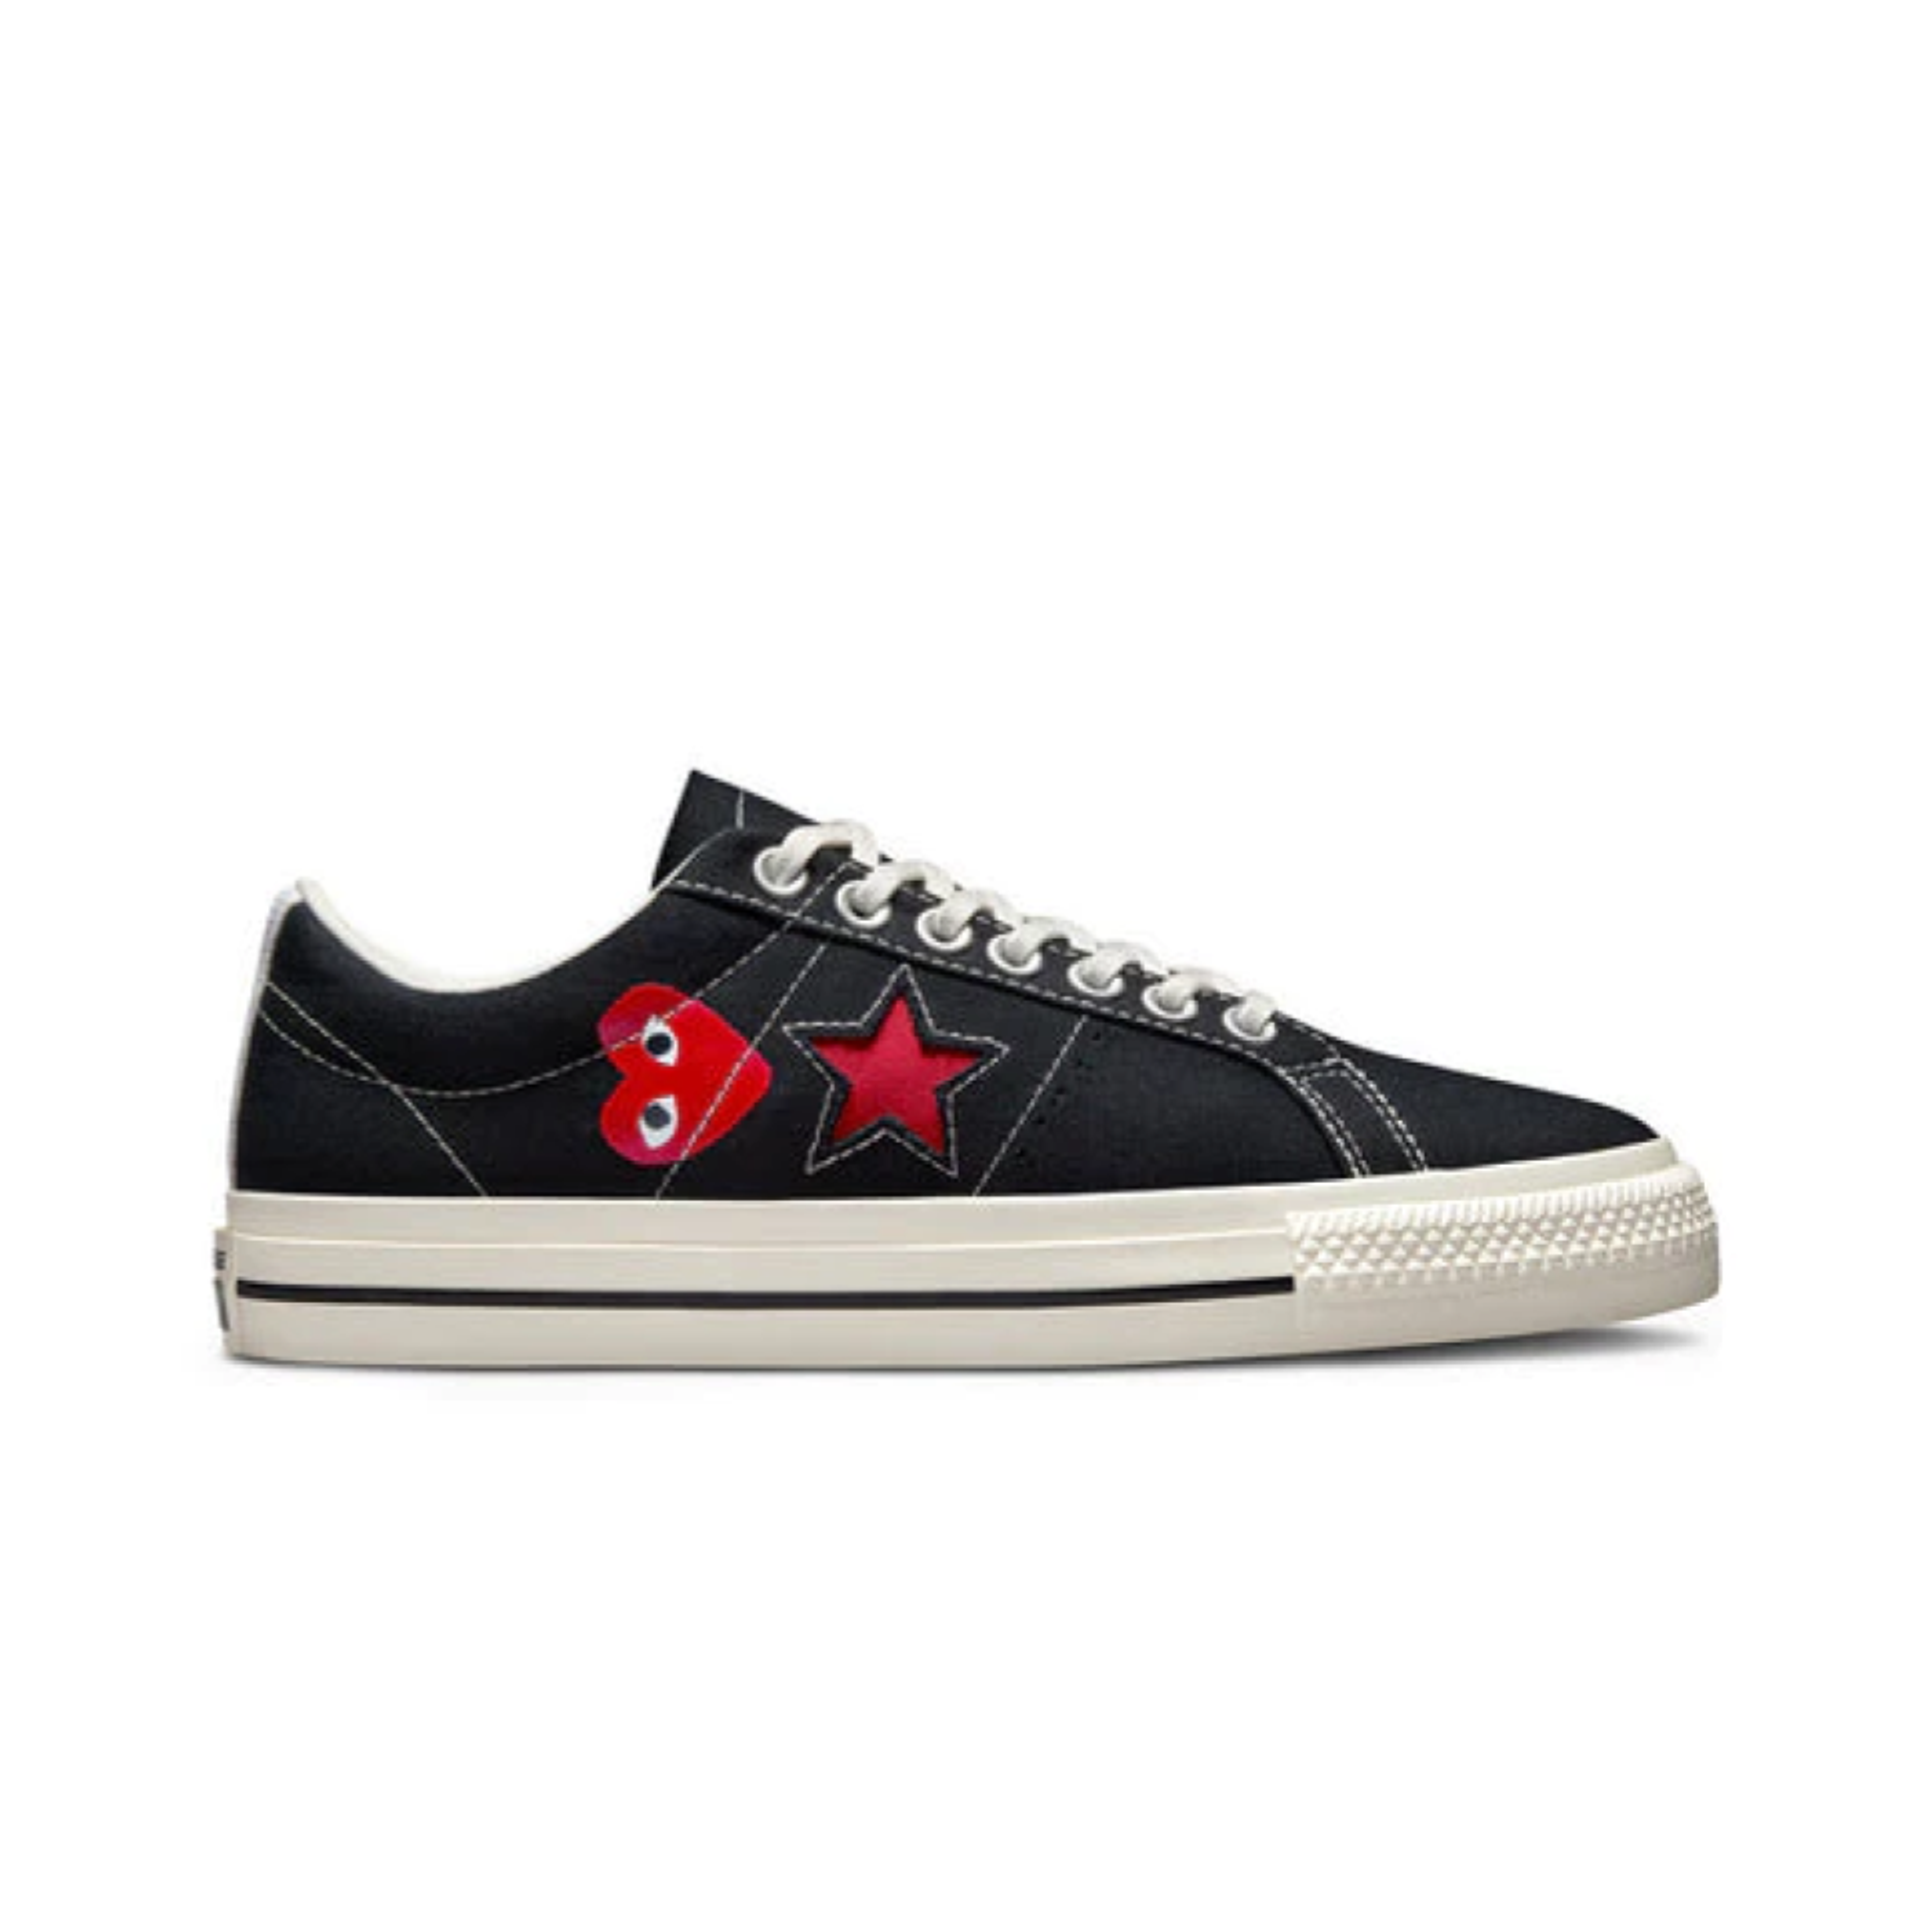 Play Comme des Garcons x Converse One Star 'Black'